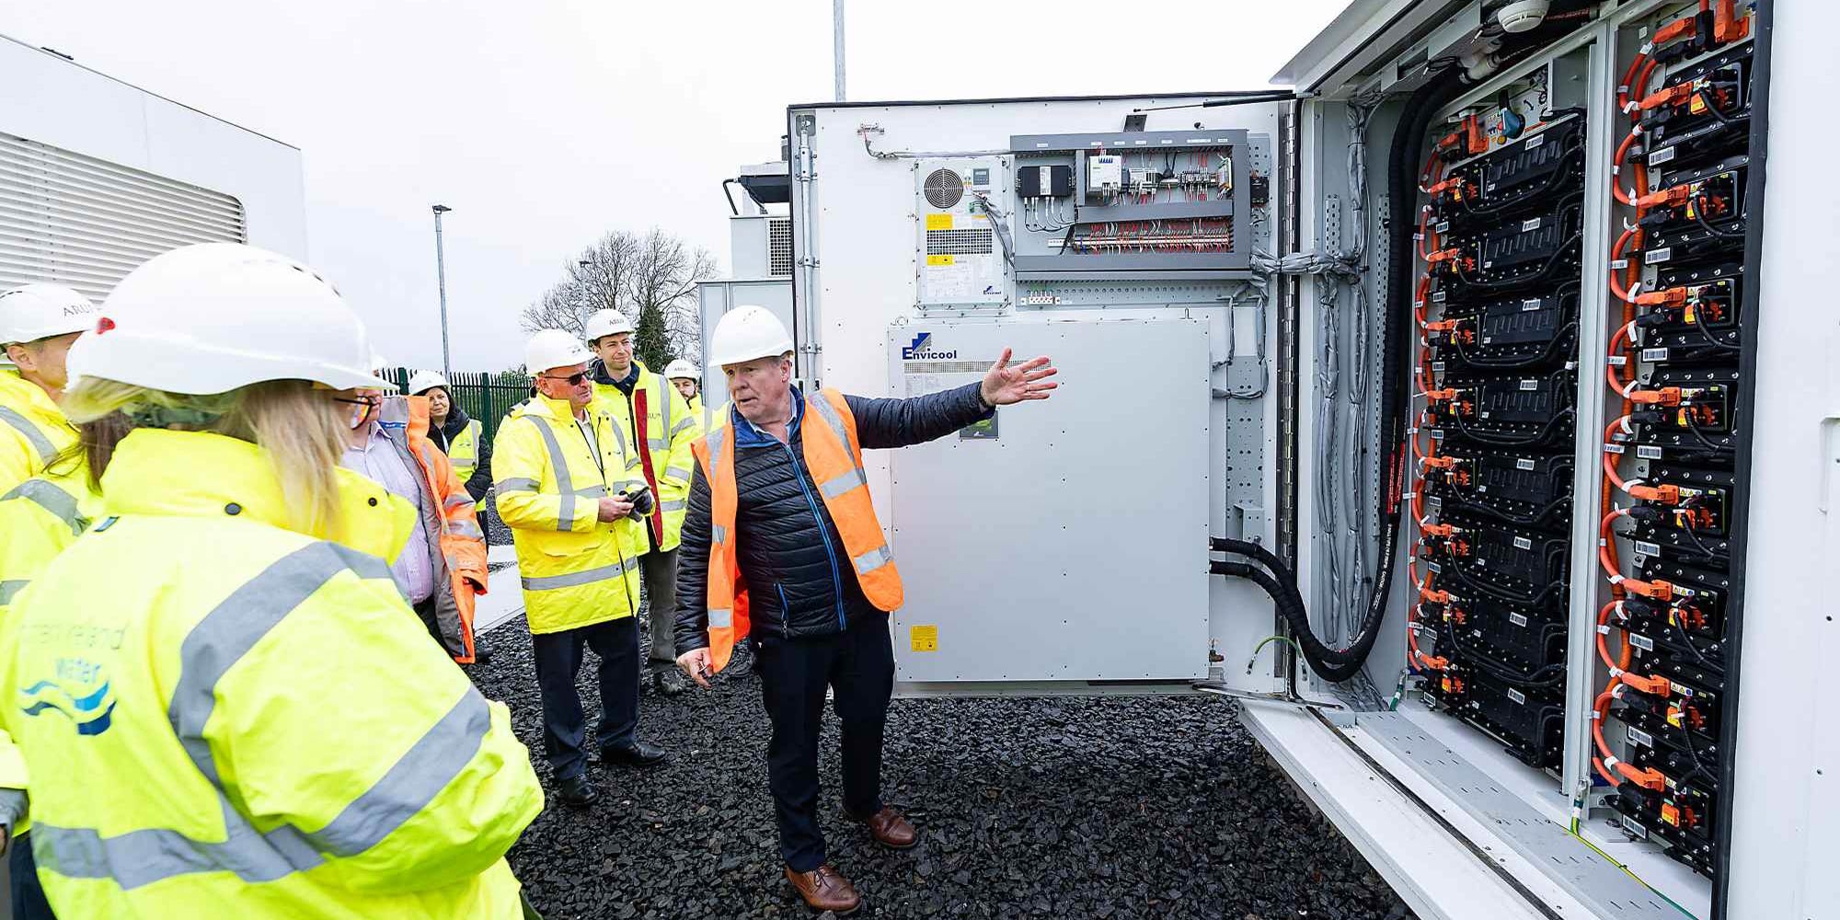 Team member showing one of the large-scale battery energy storage systems